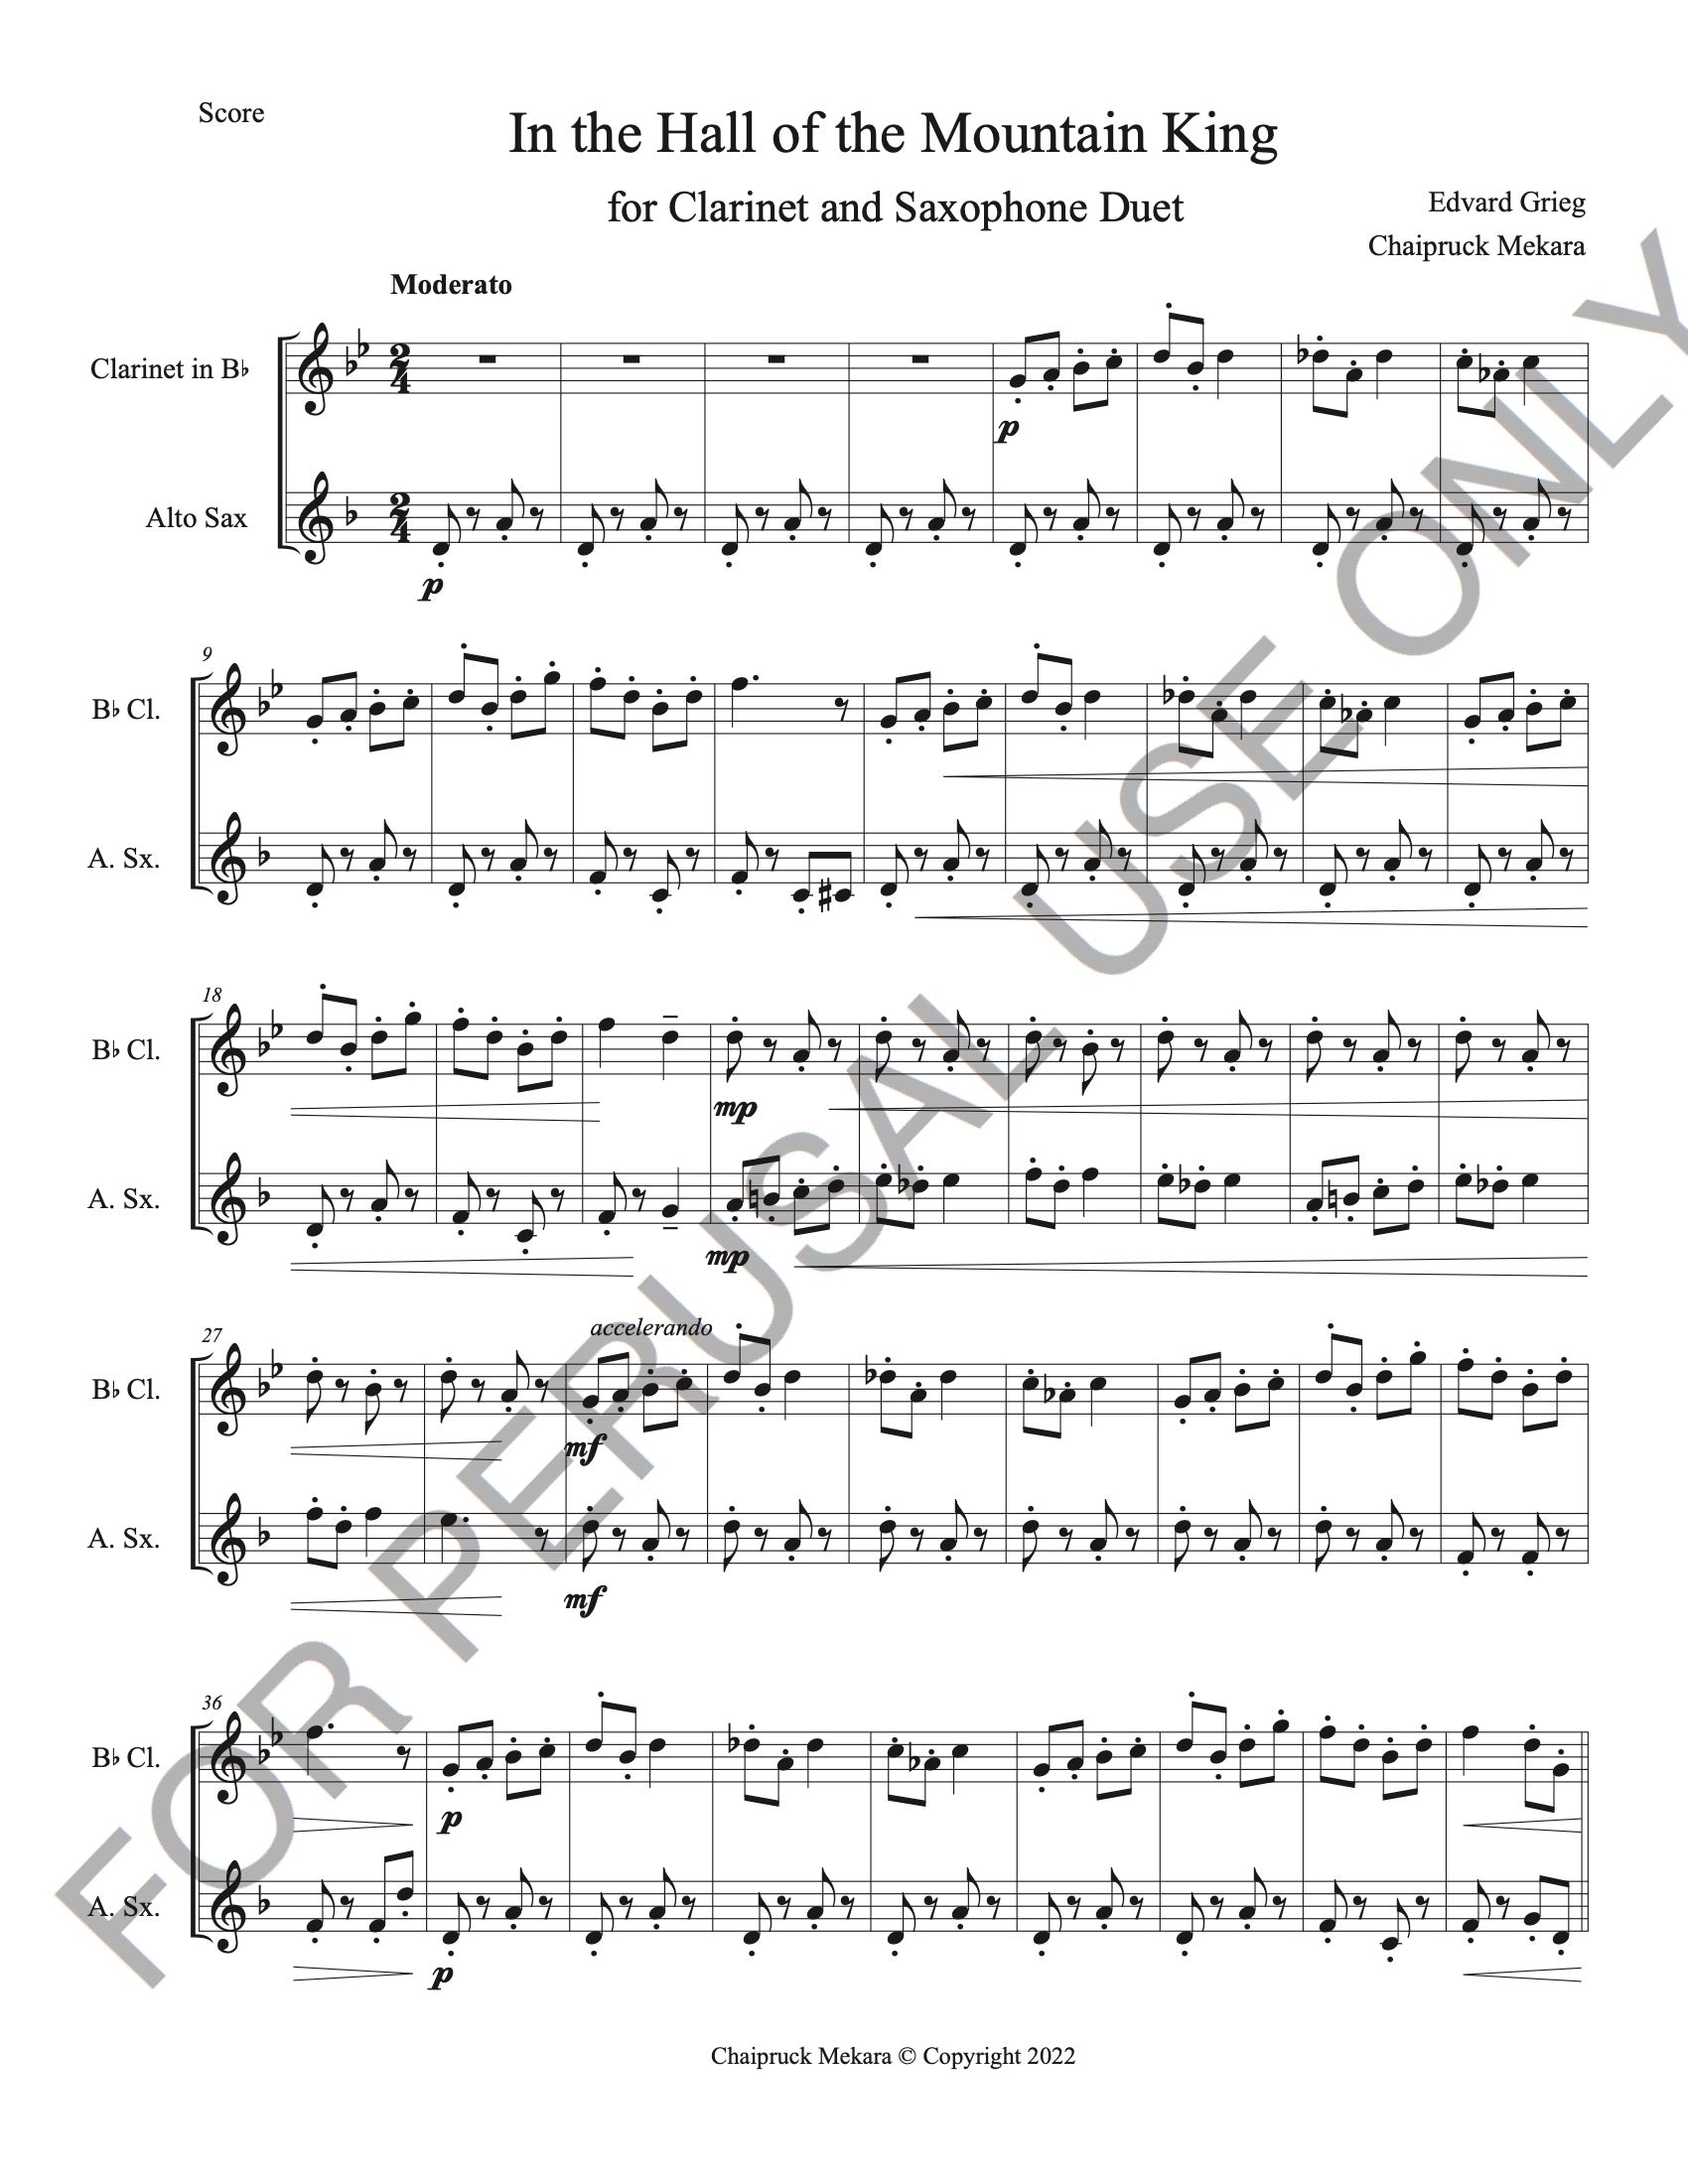 Clarinet and Saxophone Duet sheet music: In the Hall of the Mountain King